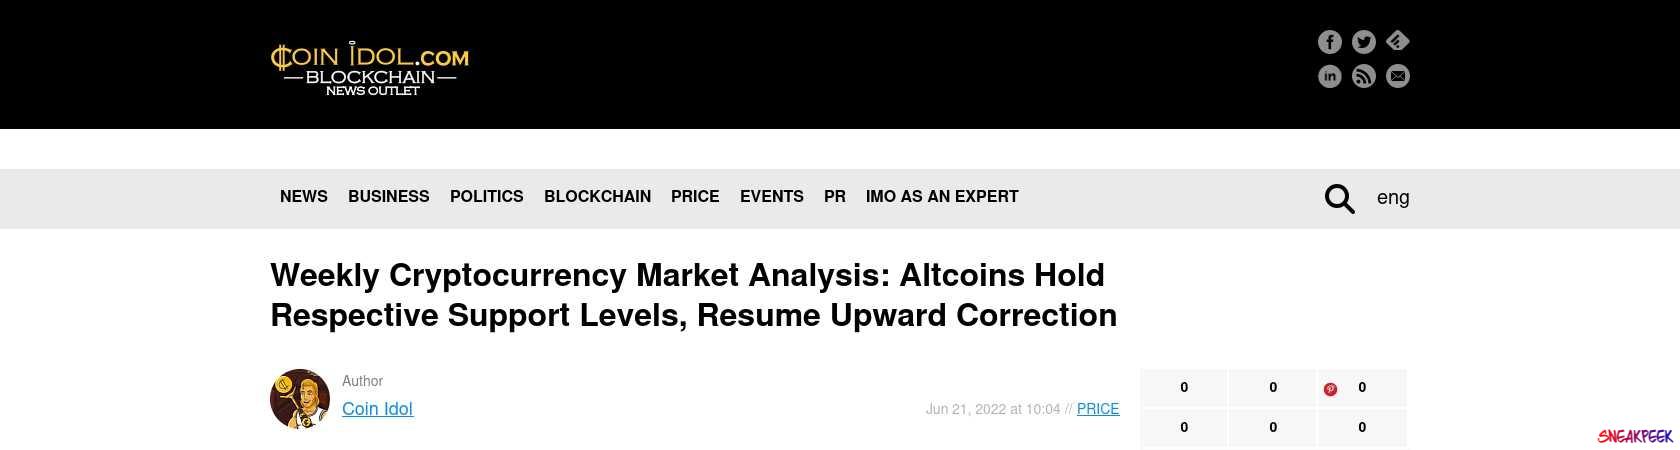 Read the full Article:  ⭲ Weekly Cryptocurrency Market Analysis: Altcoins Hold Respective Support Levels, Resume Upward Correction